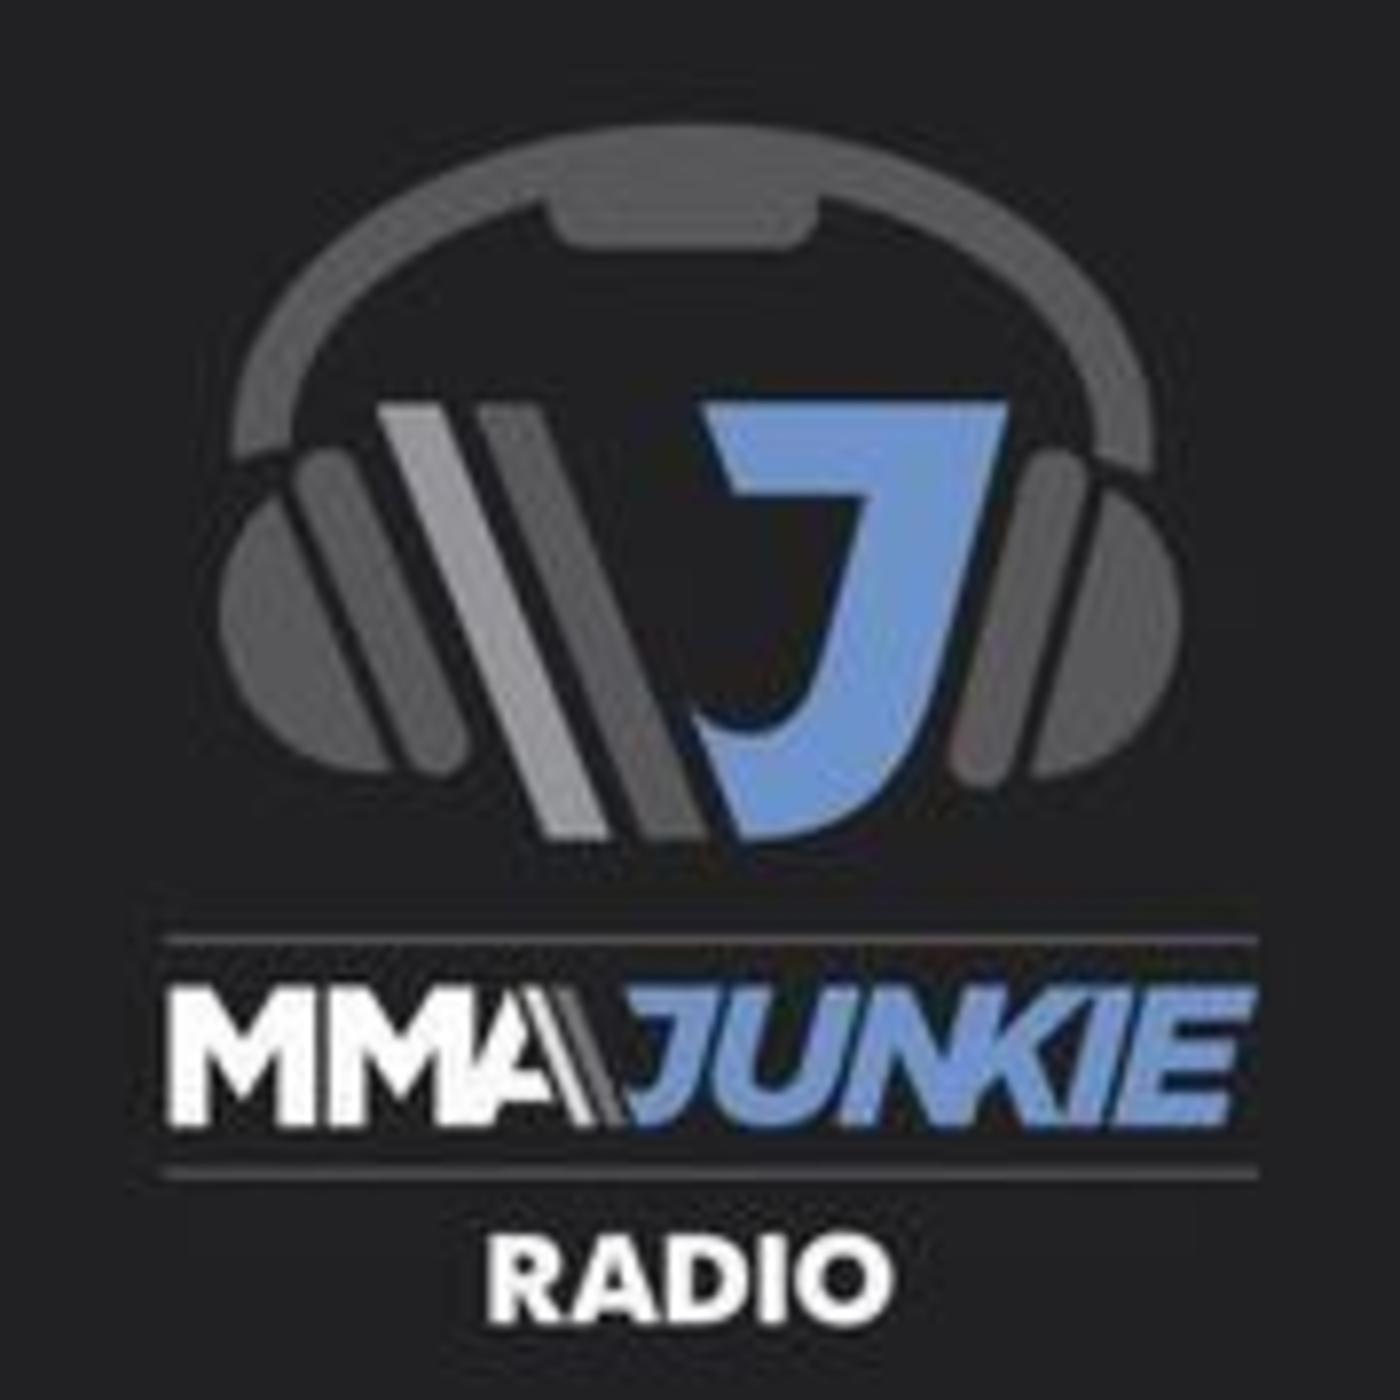 Ep. 3,042: Latest on UFC 249, how Conor McGregor affected by new headliner